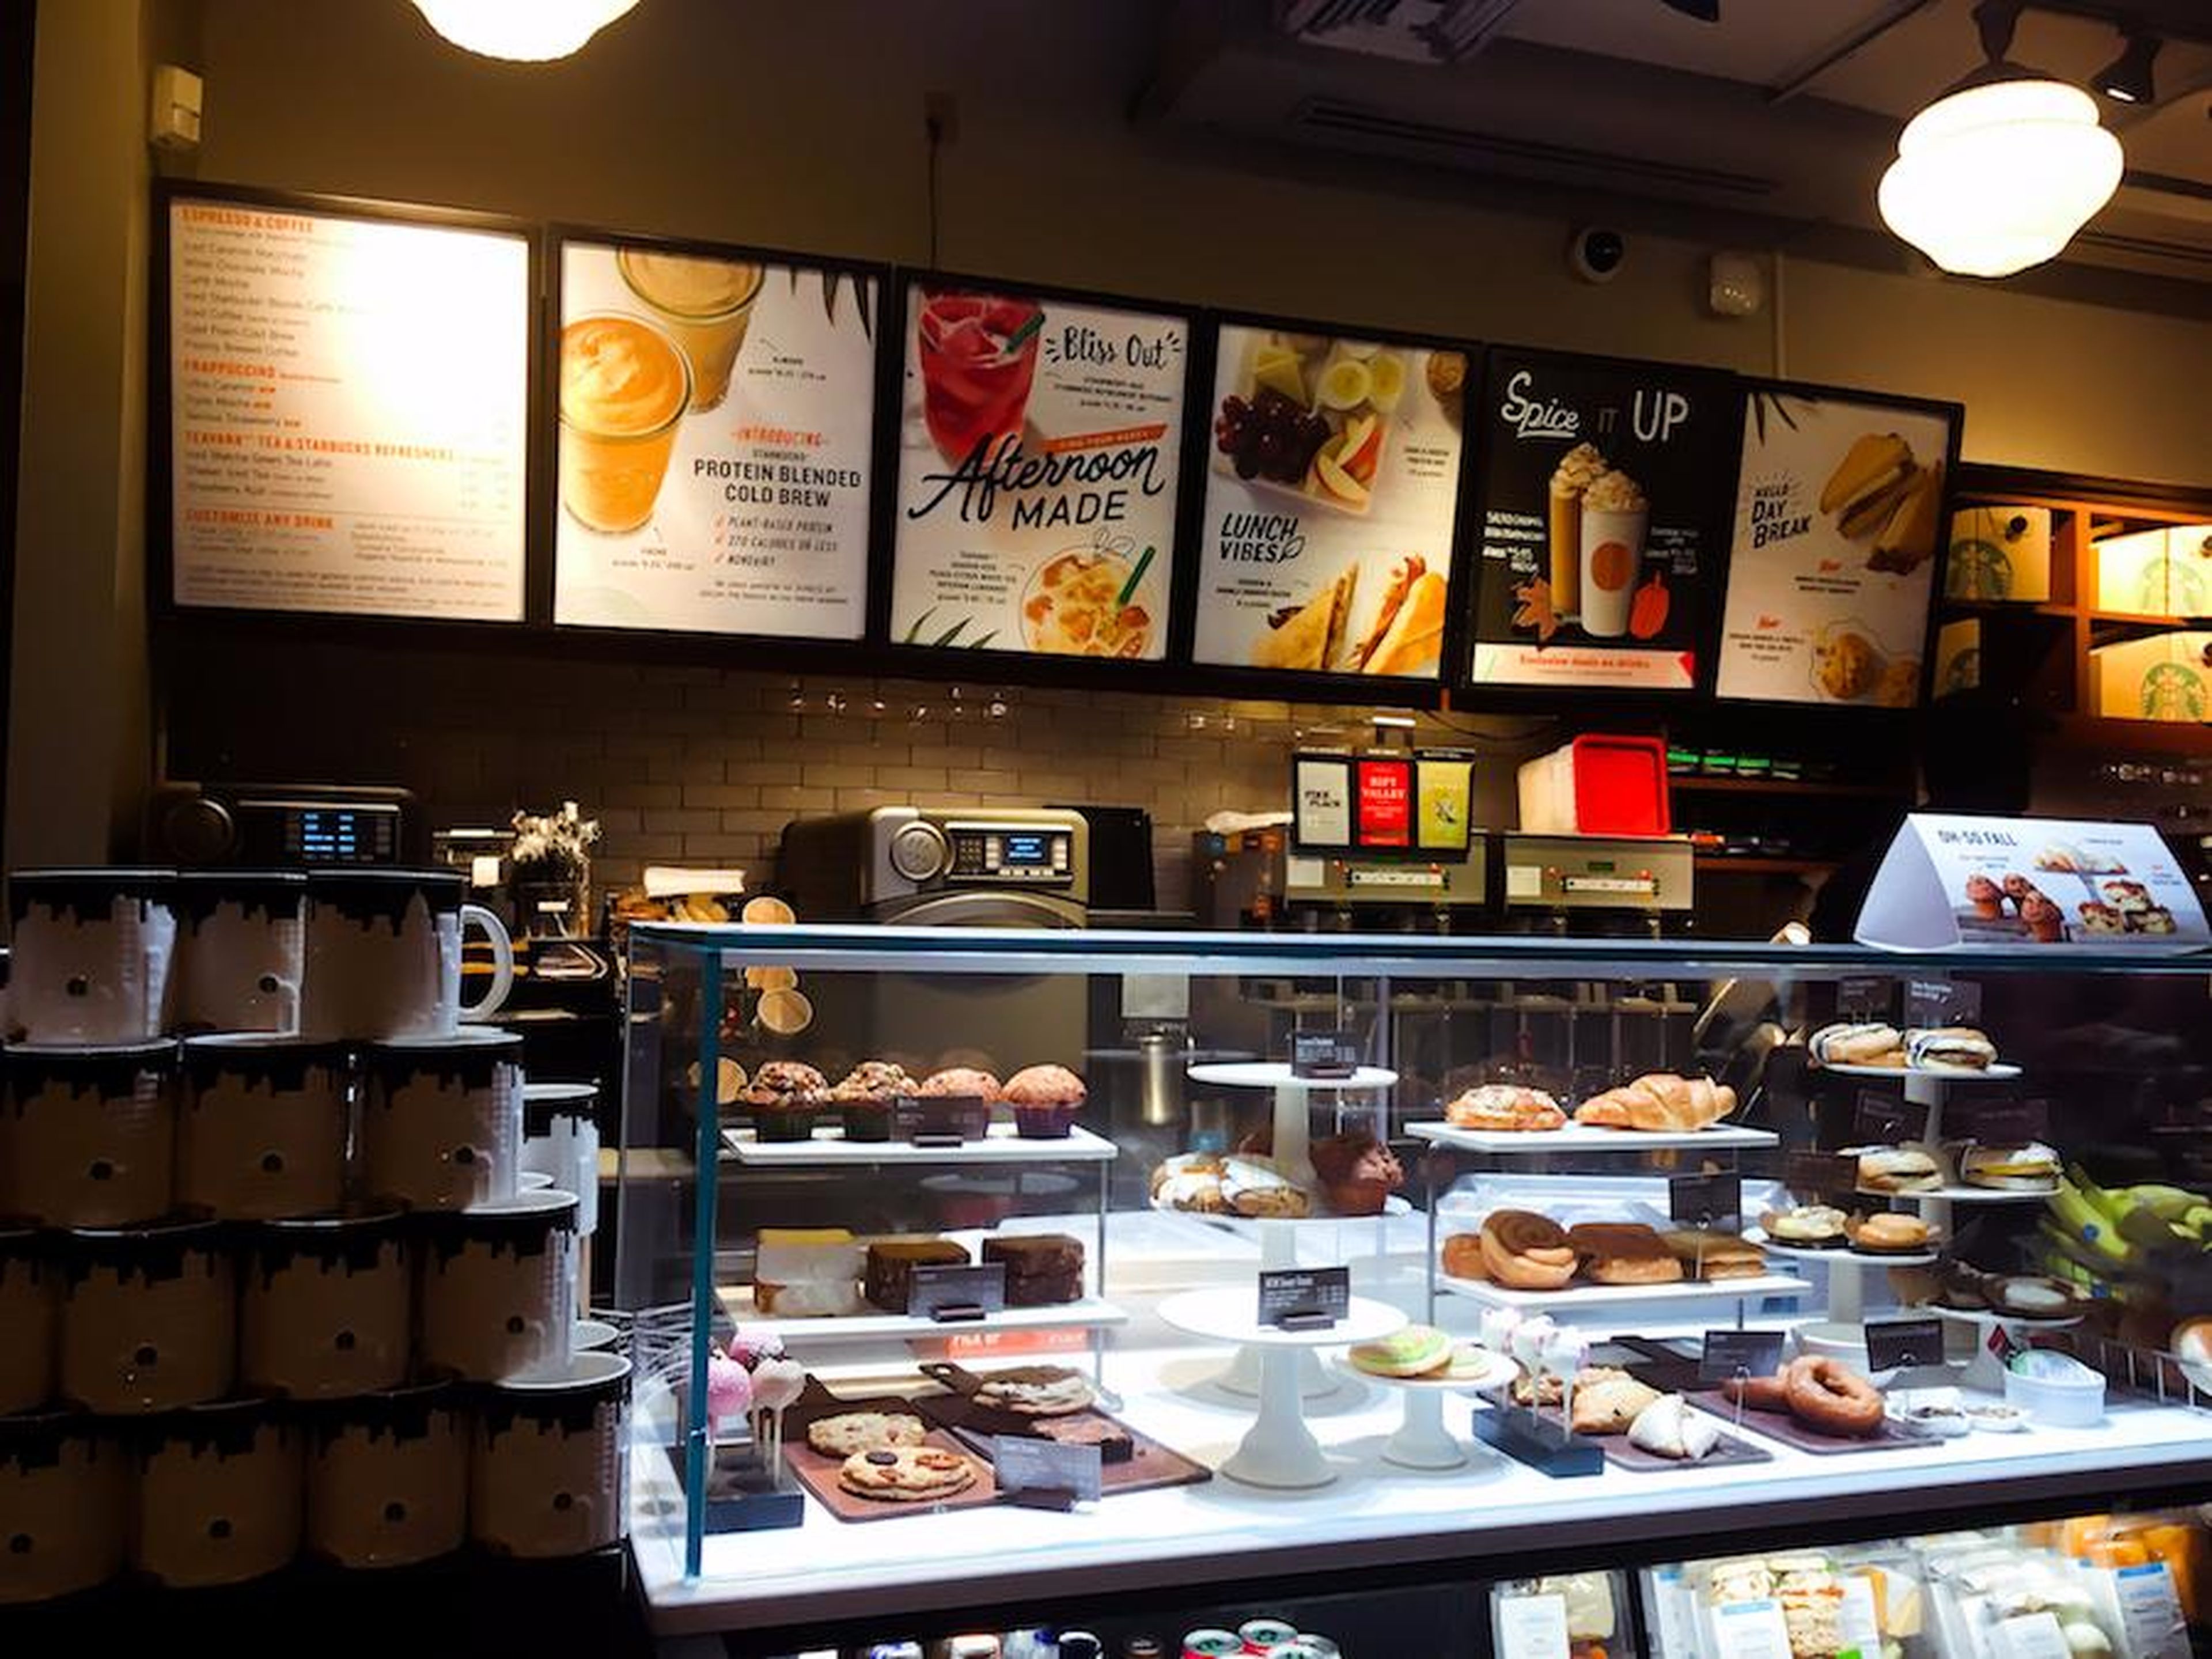 Starbucks also offers these coffees but has a larger selection of more experimental flavors including its seasonal Pumpkin Spice Latte, Vanilla Bean Latte, and signature Frappucinos, which do not all contain coffee.